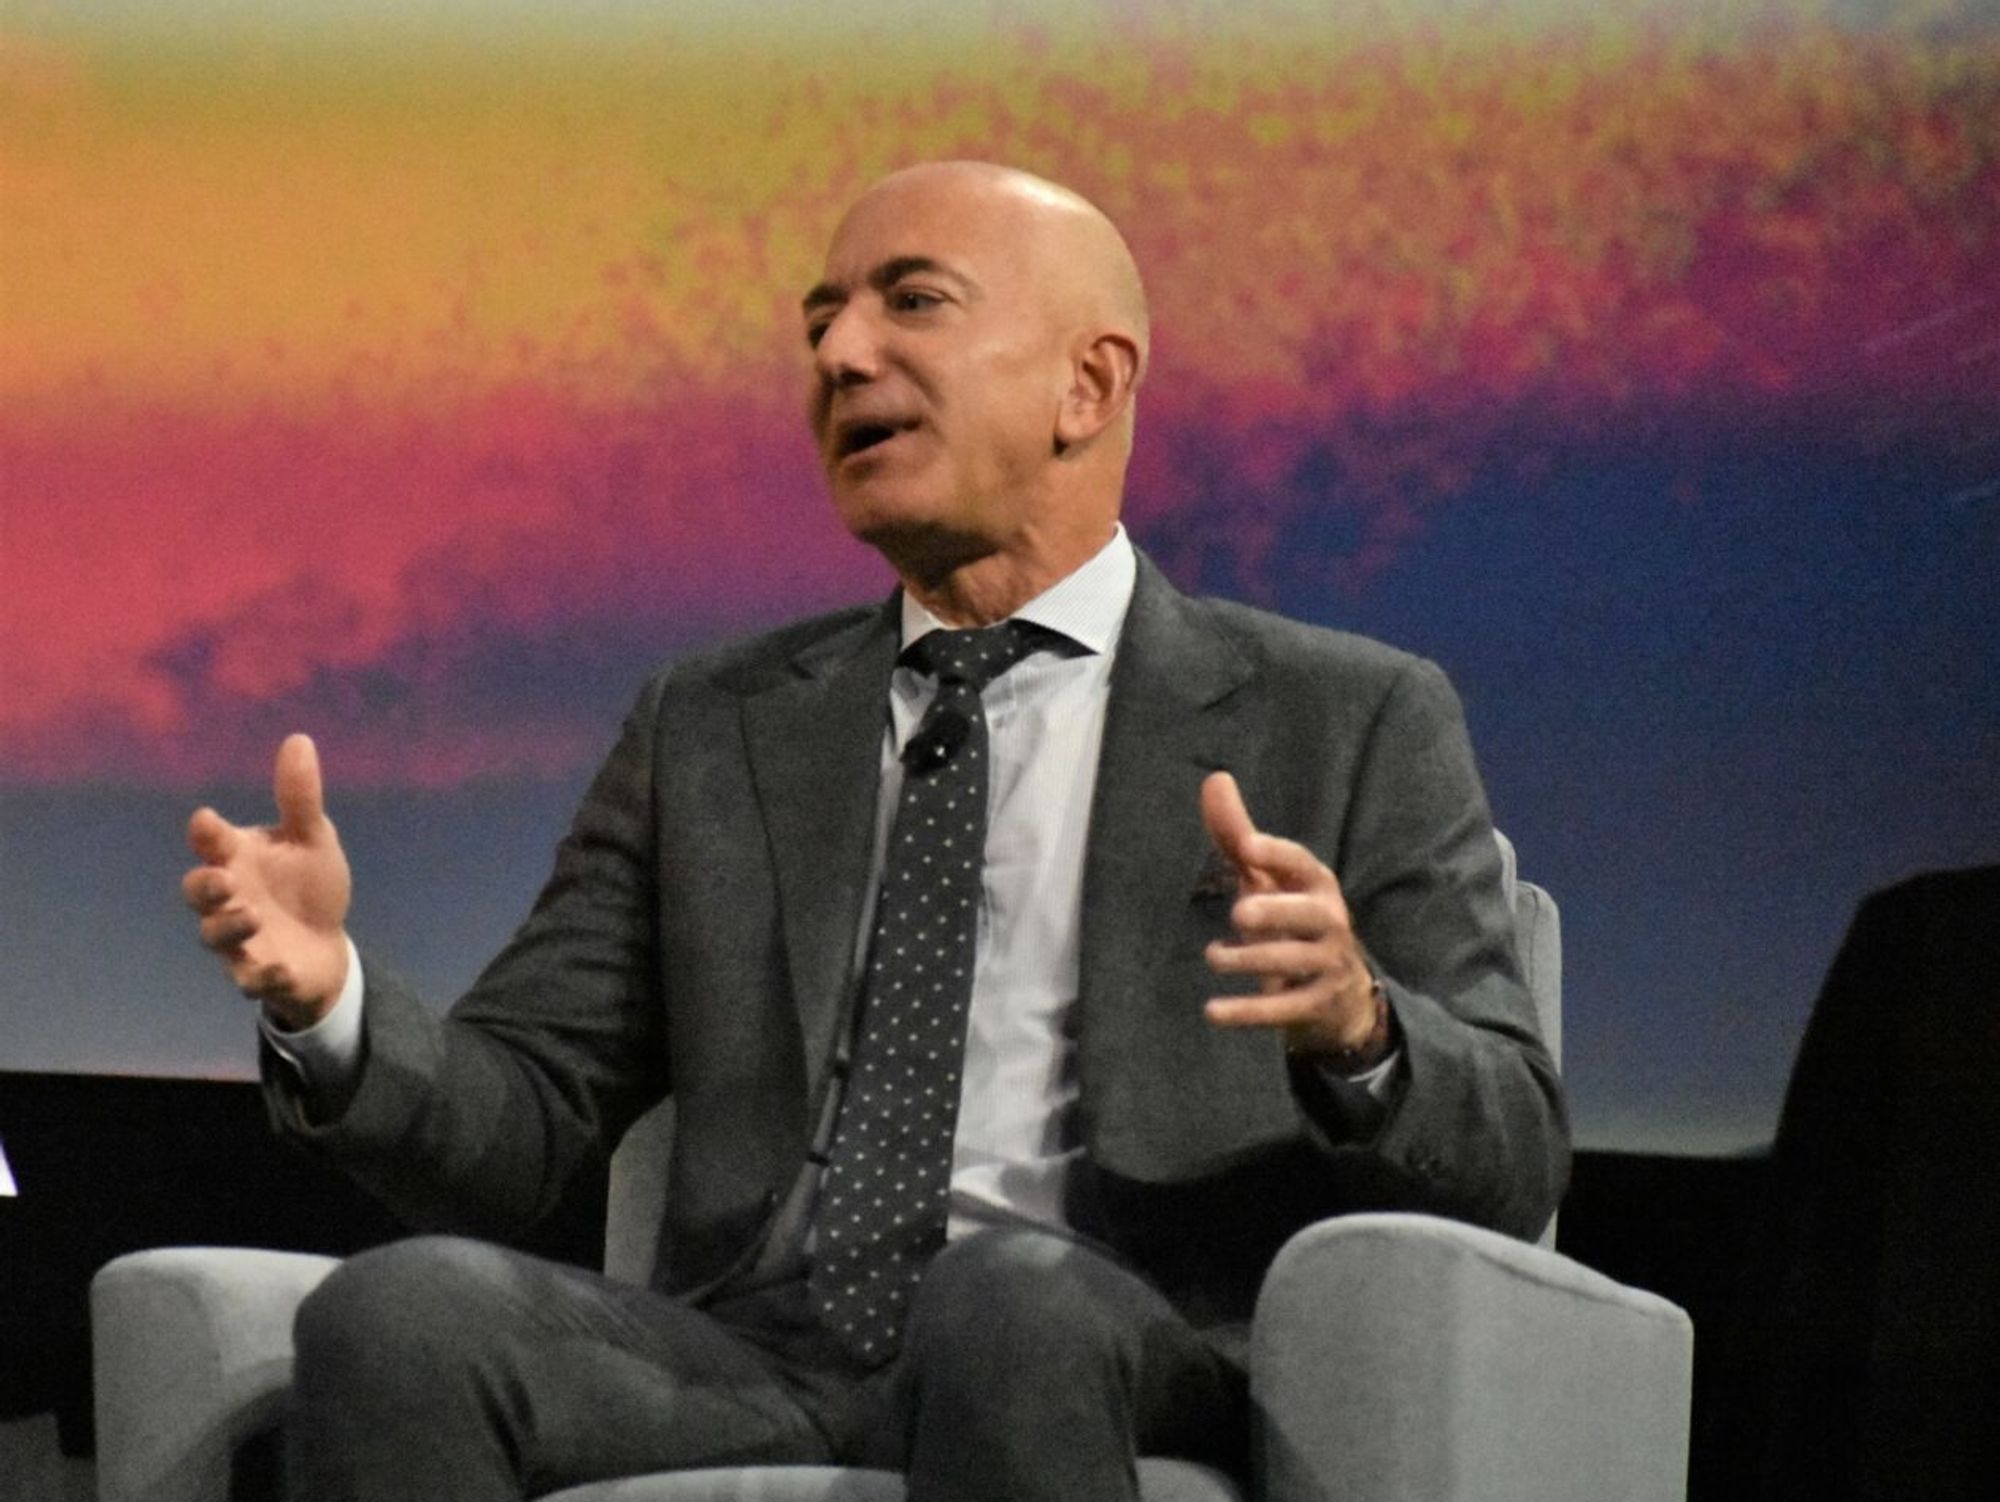 Report: Jeff Bezos Buys L.A. Mansion for $165M